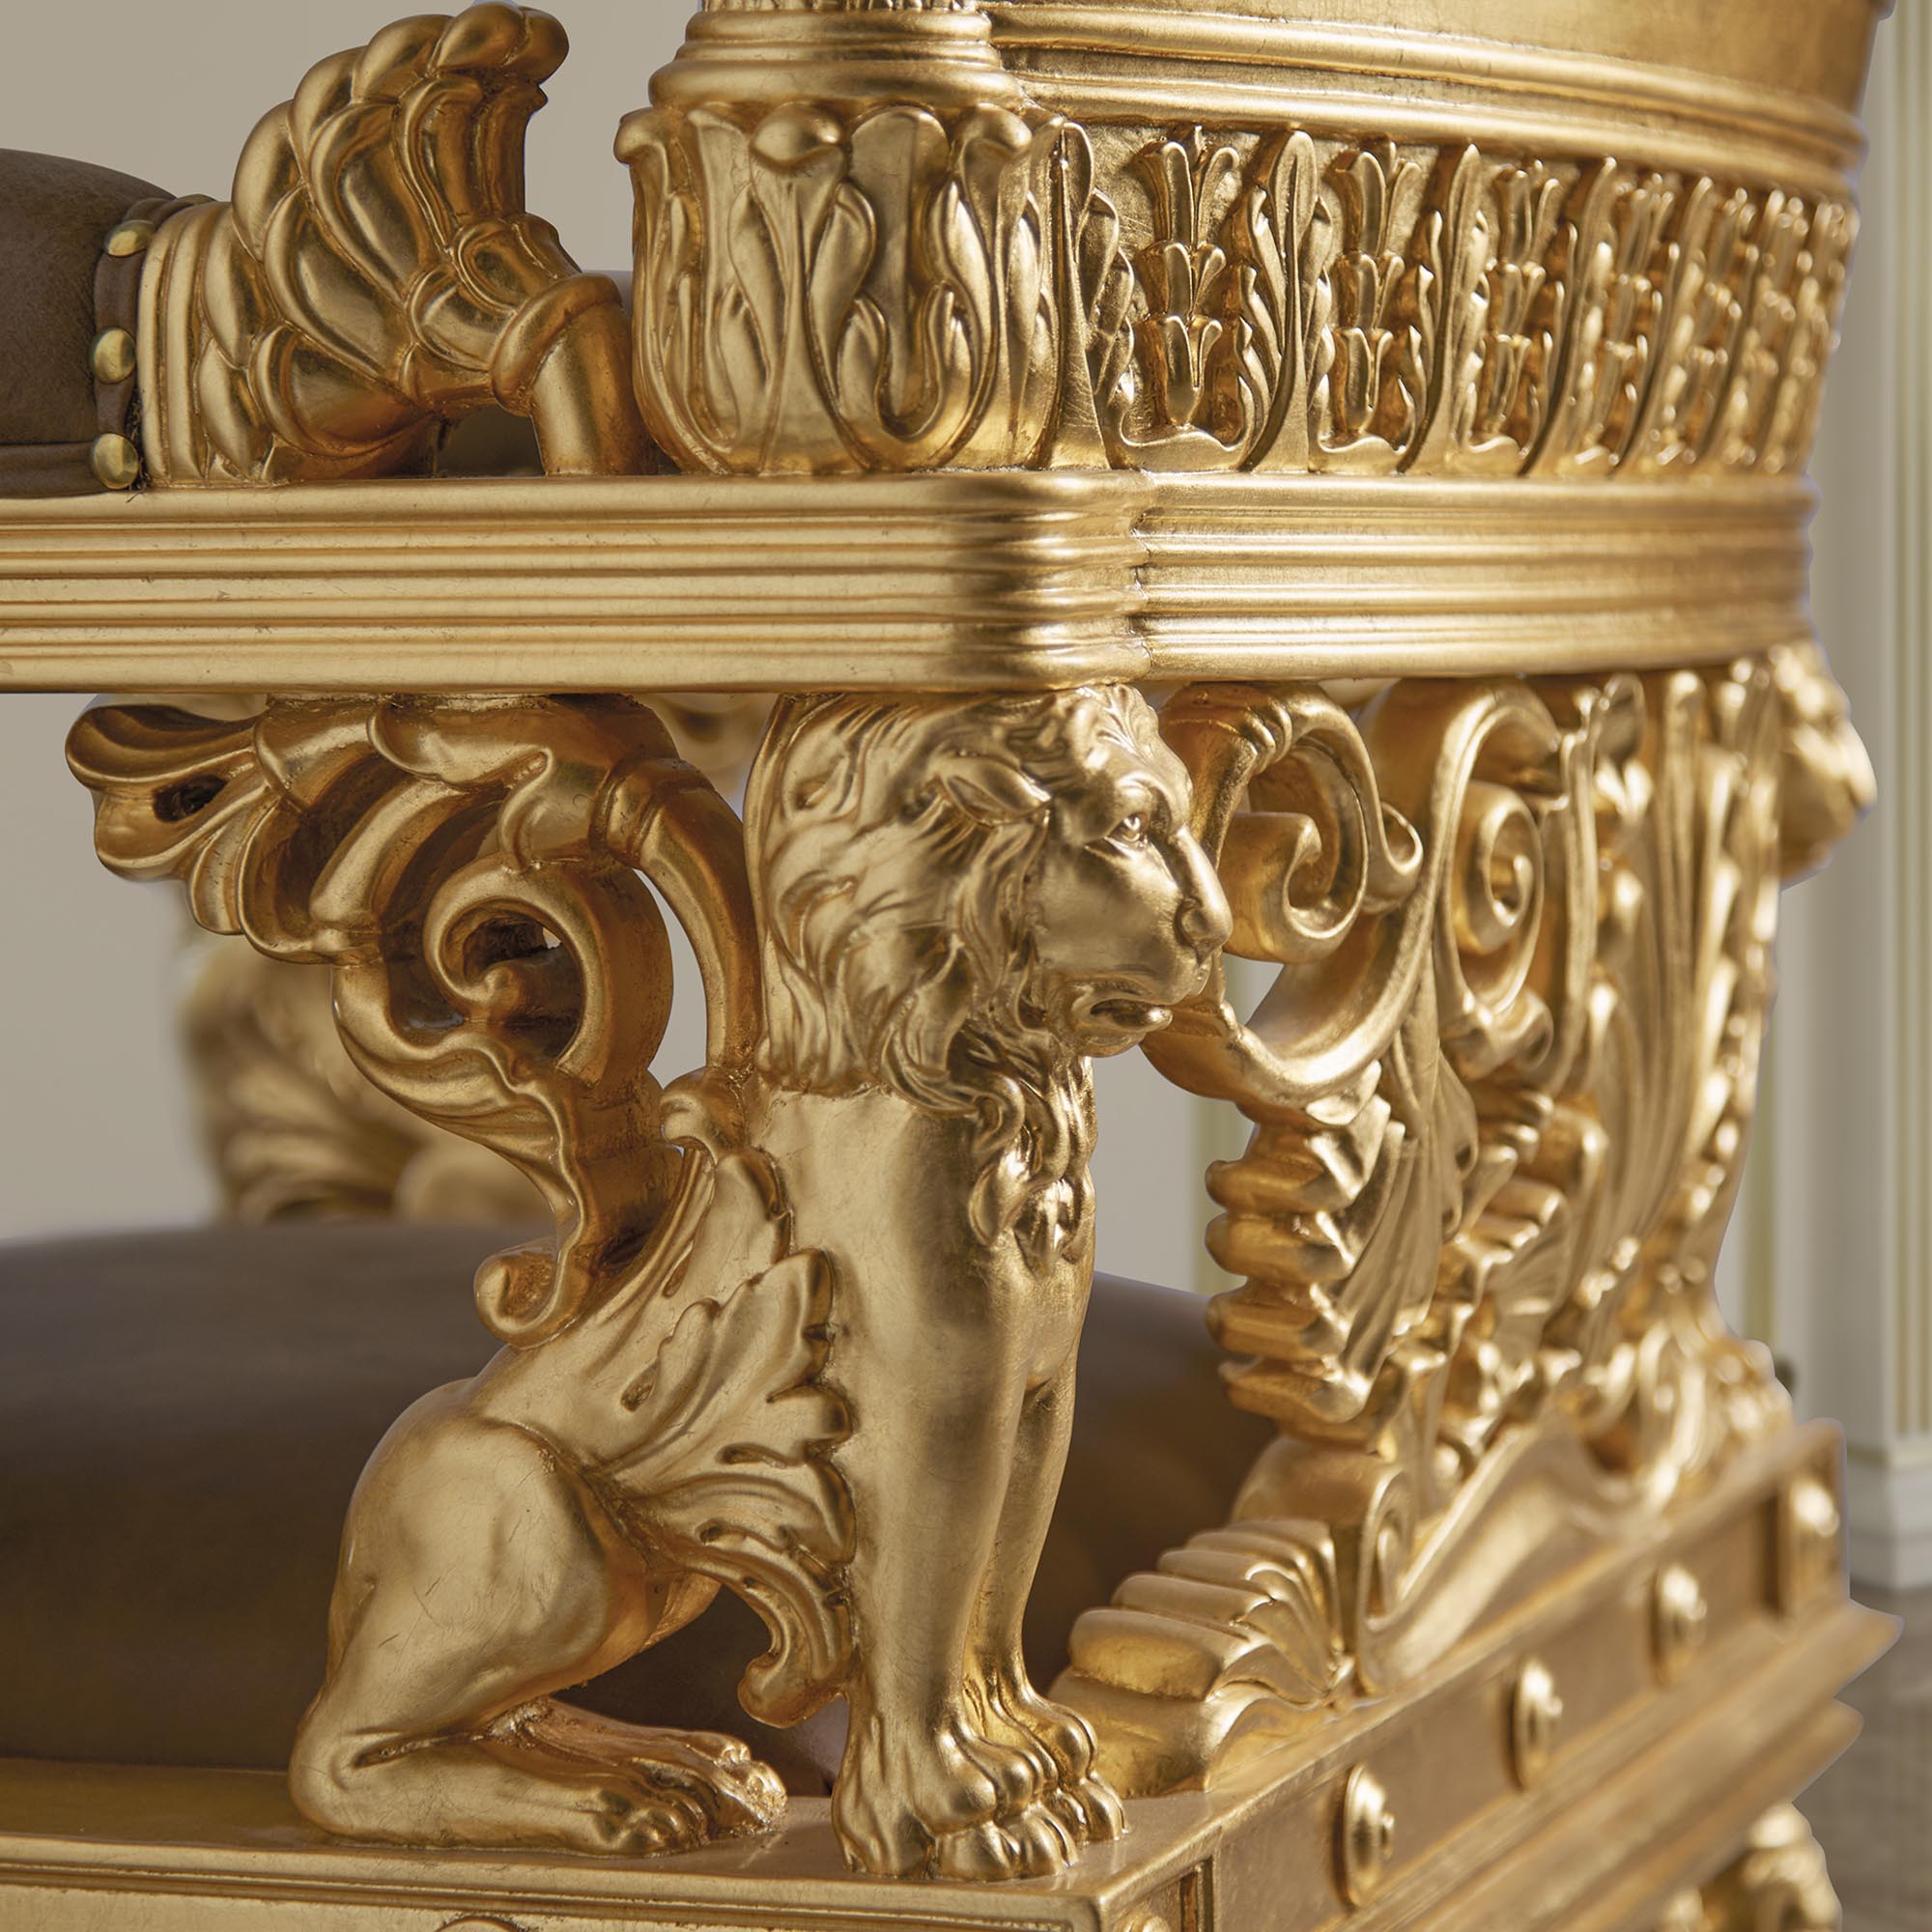 Creating Timeless Interiors with 24k Gold Leaf Décor